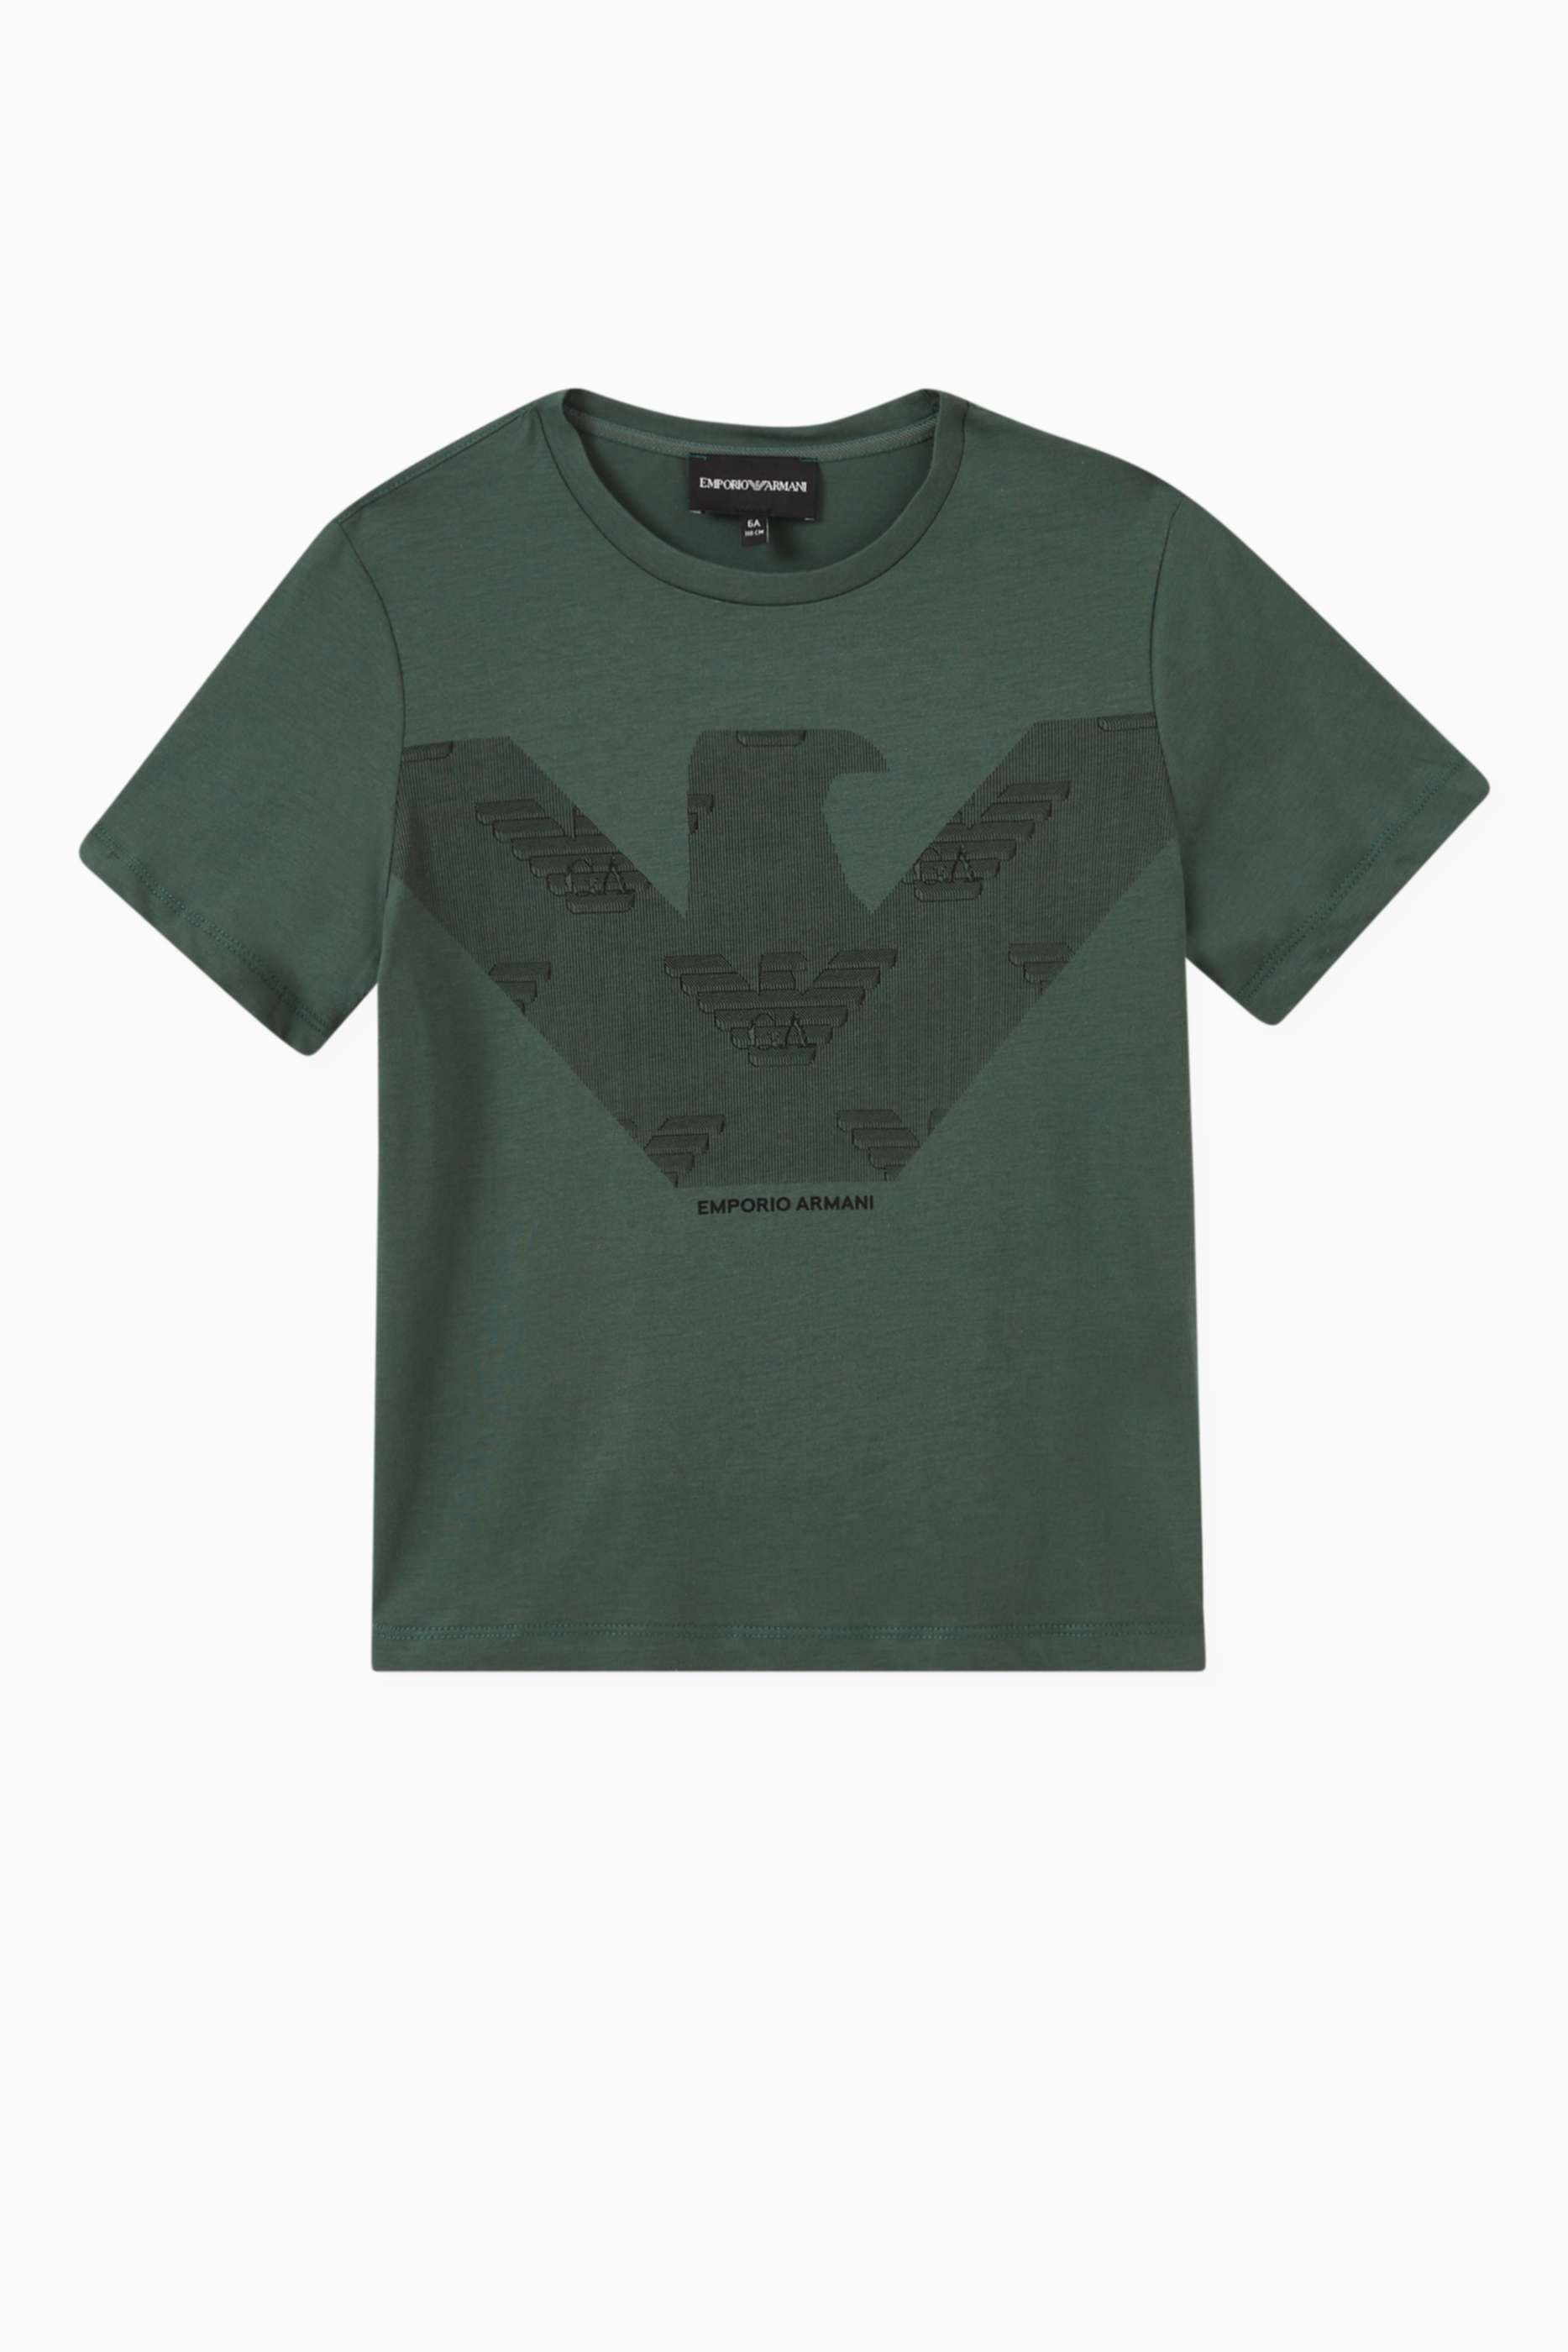 Shop Emporio Armani Green Logo Print T-Shirt in Jersey for Kids 